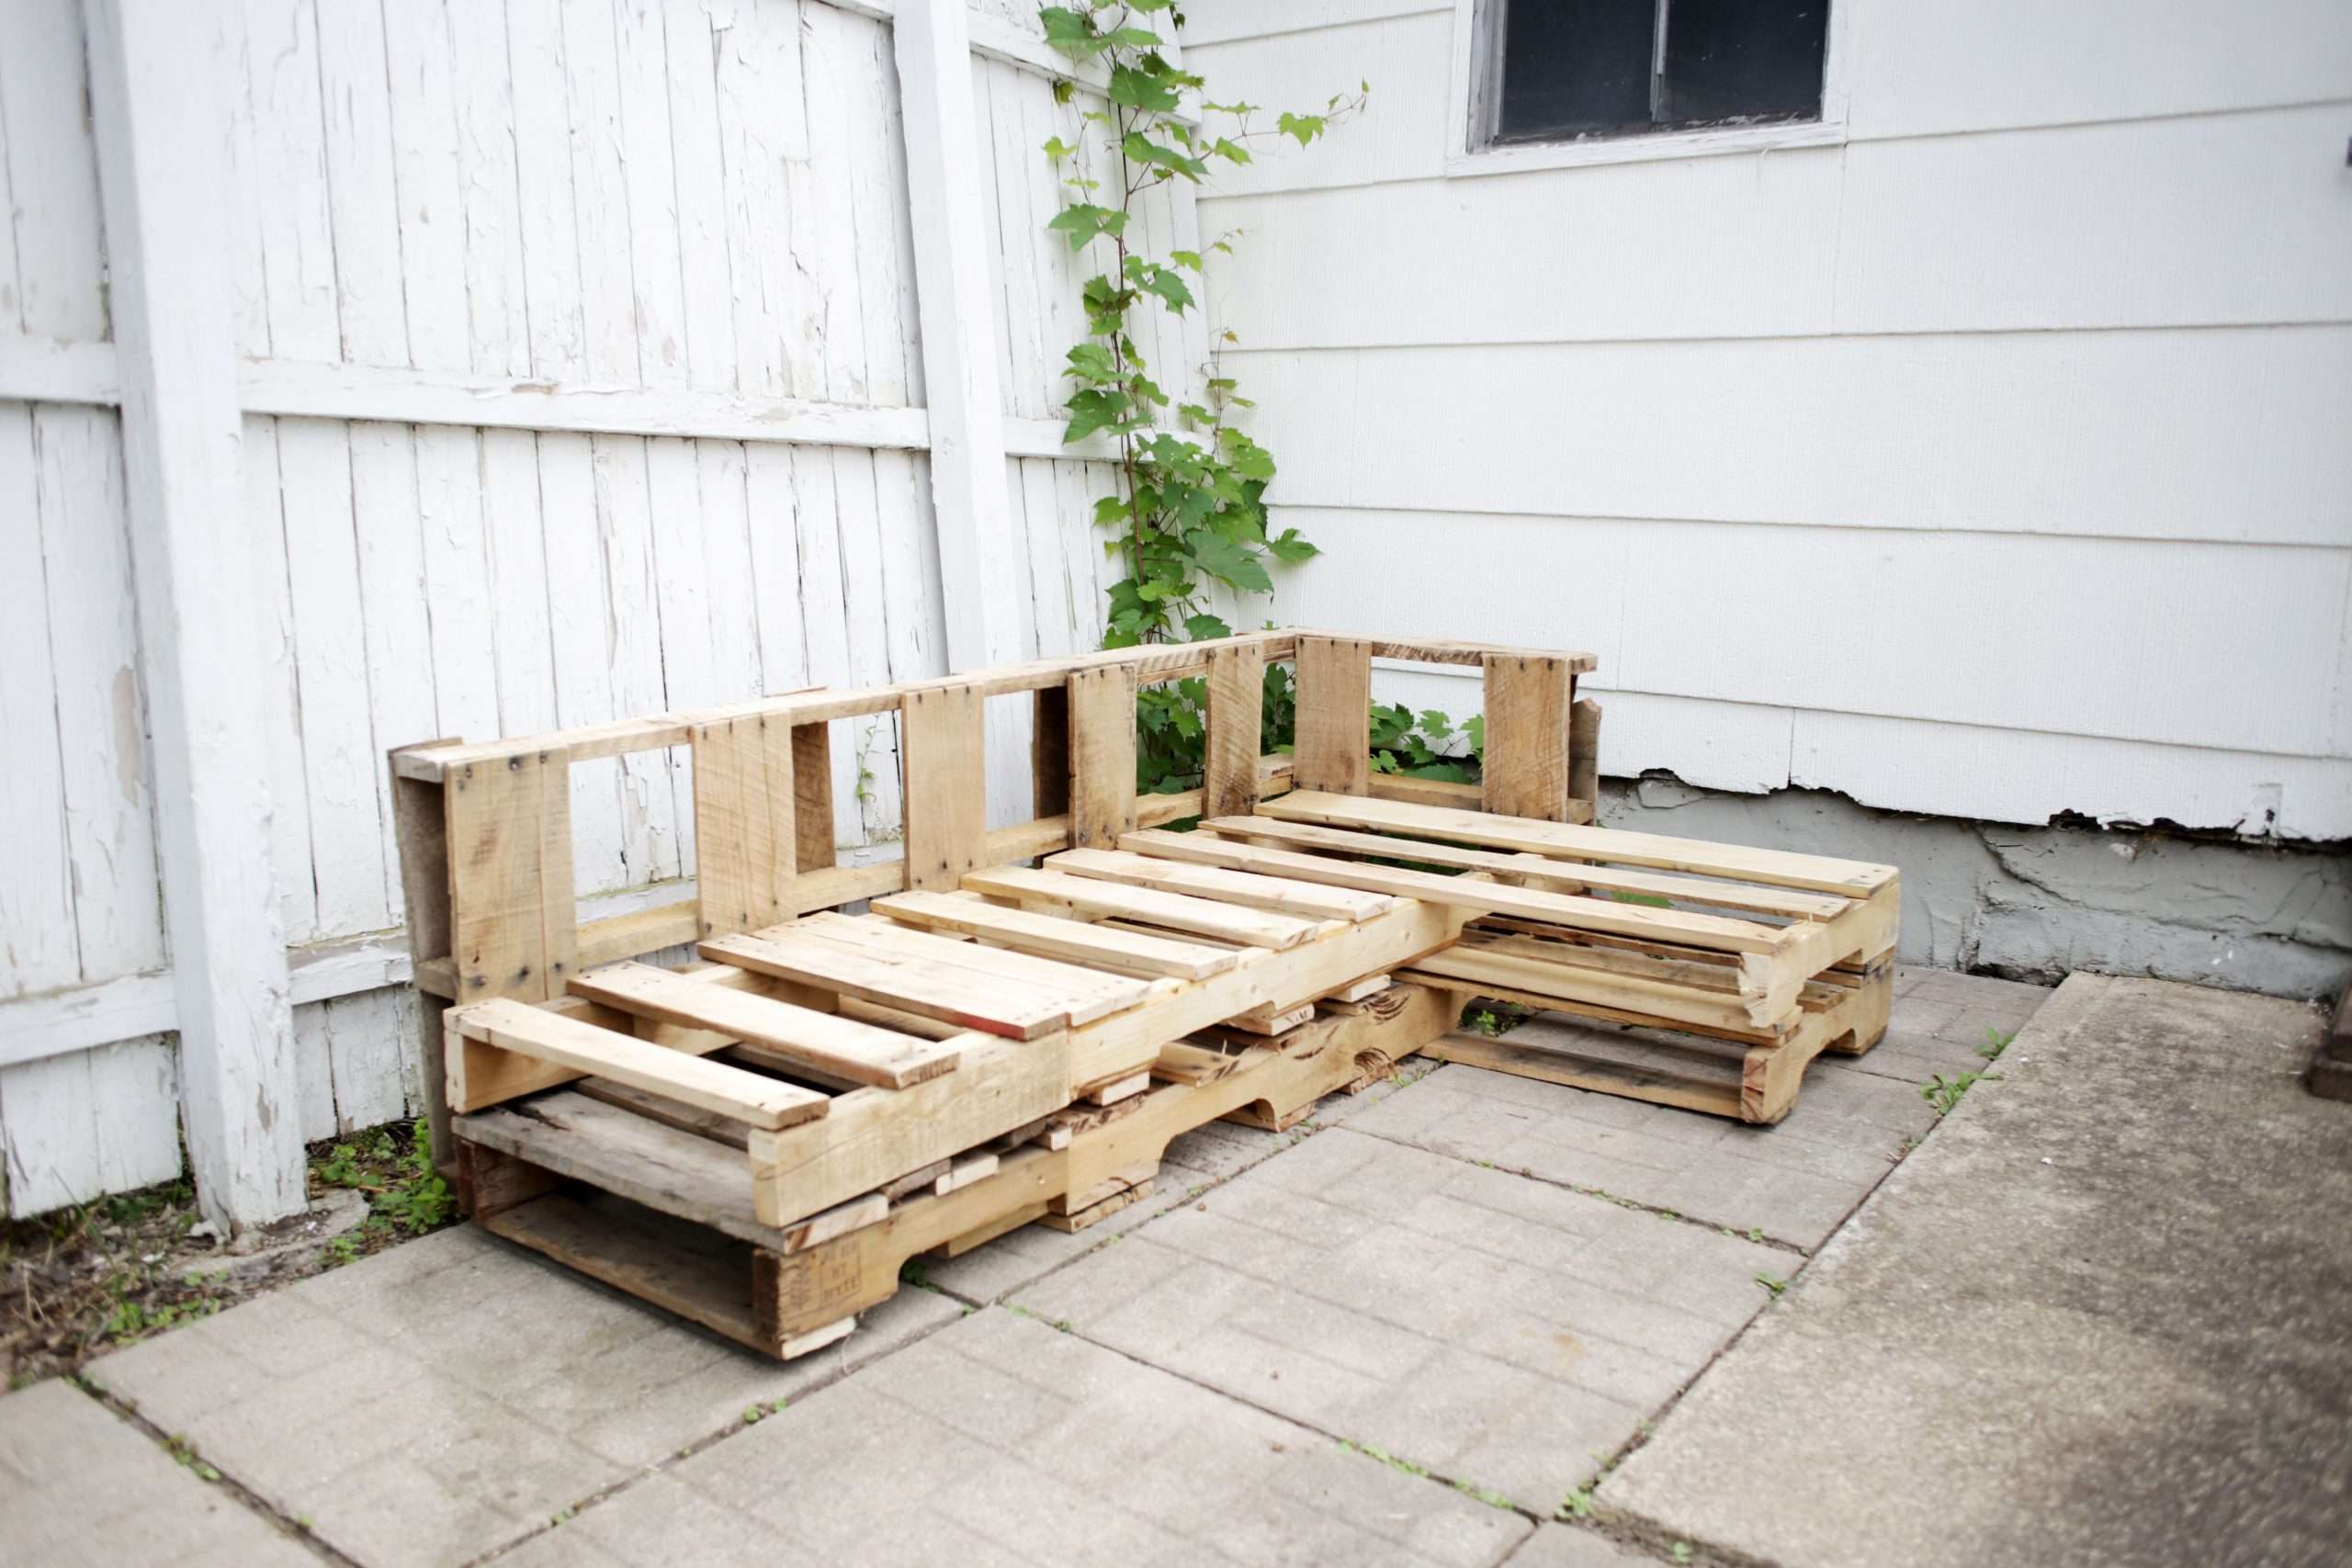 How to Make a Couch Out of Pallets